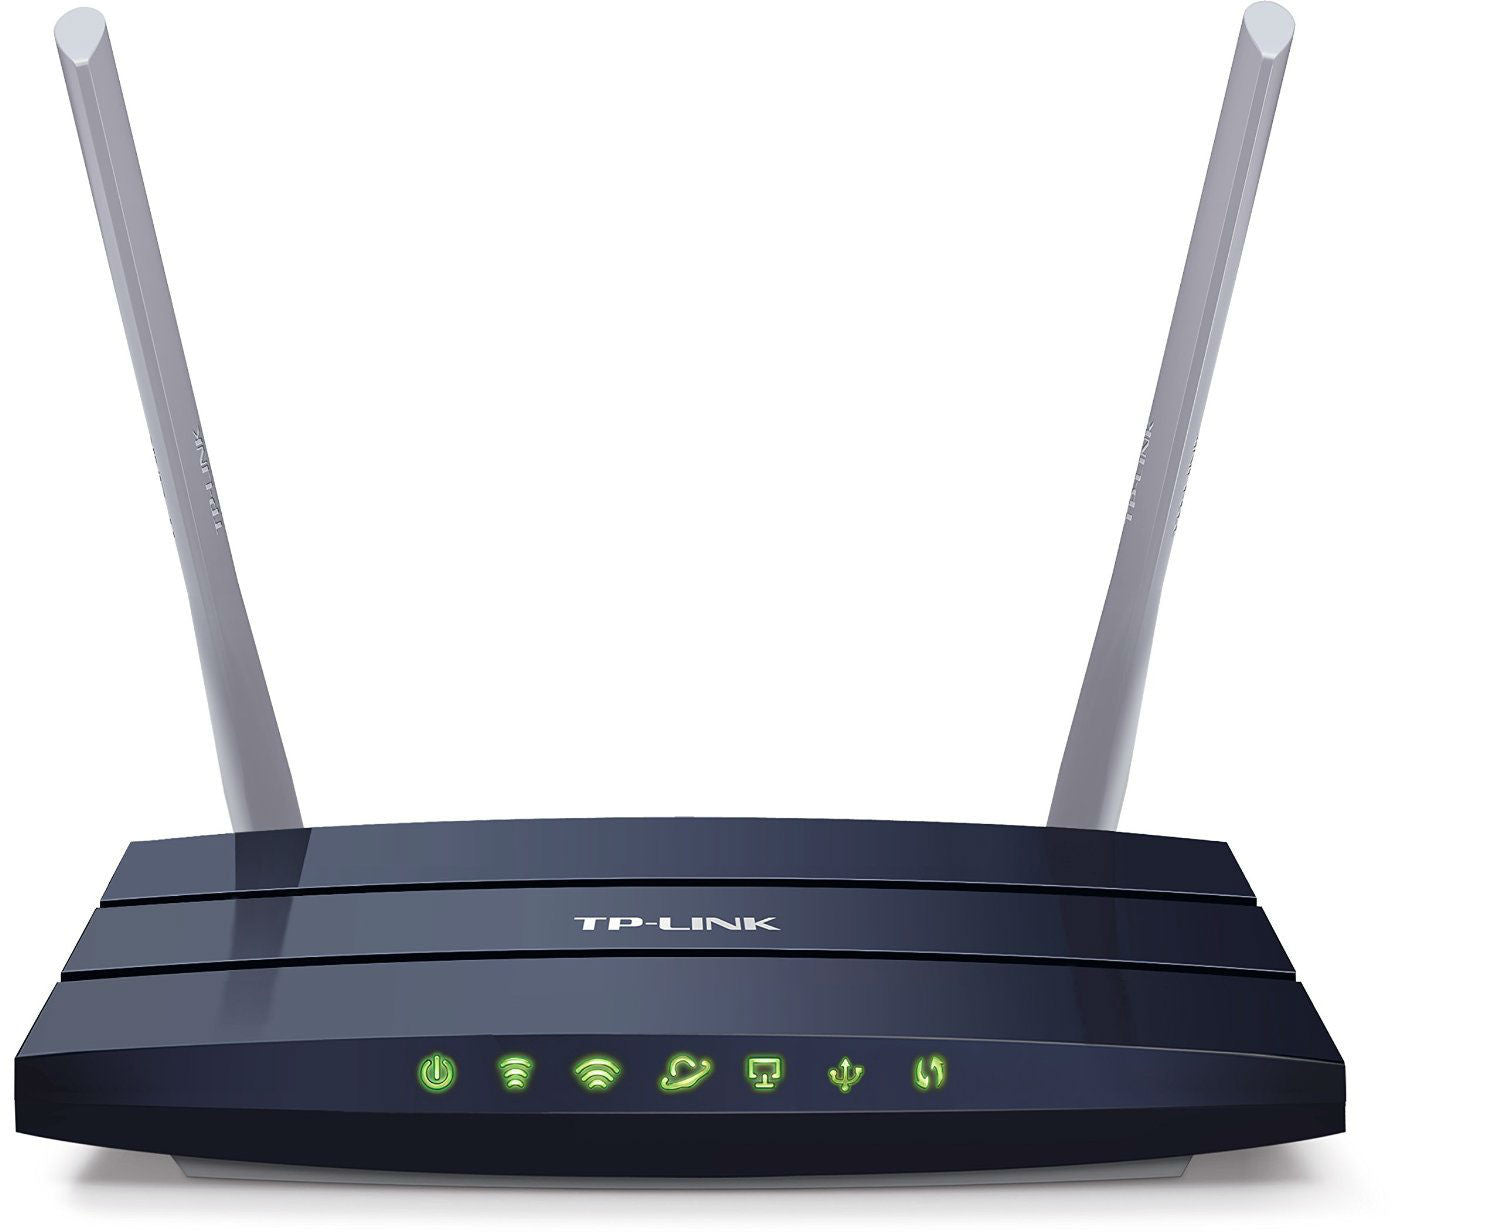 AC1200-Wireless-Dual-Band-Gigabit-Router